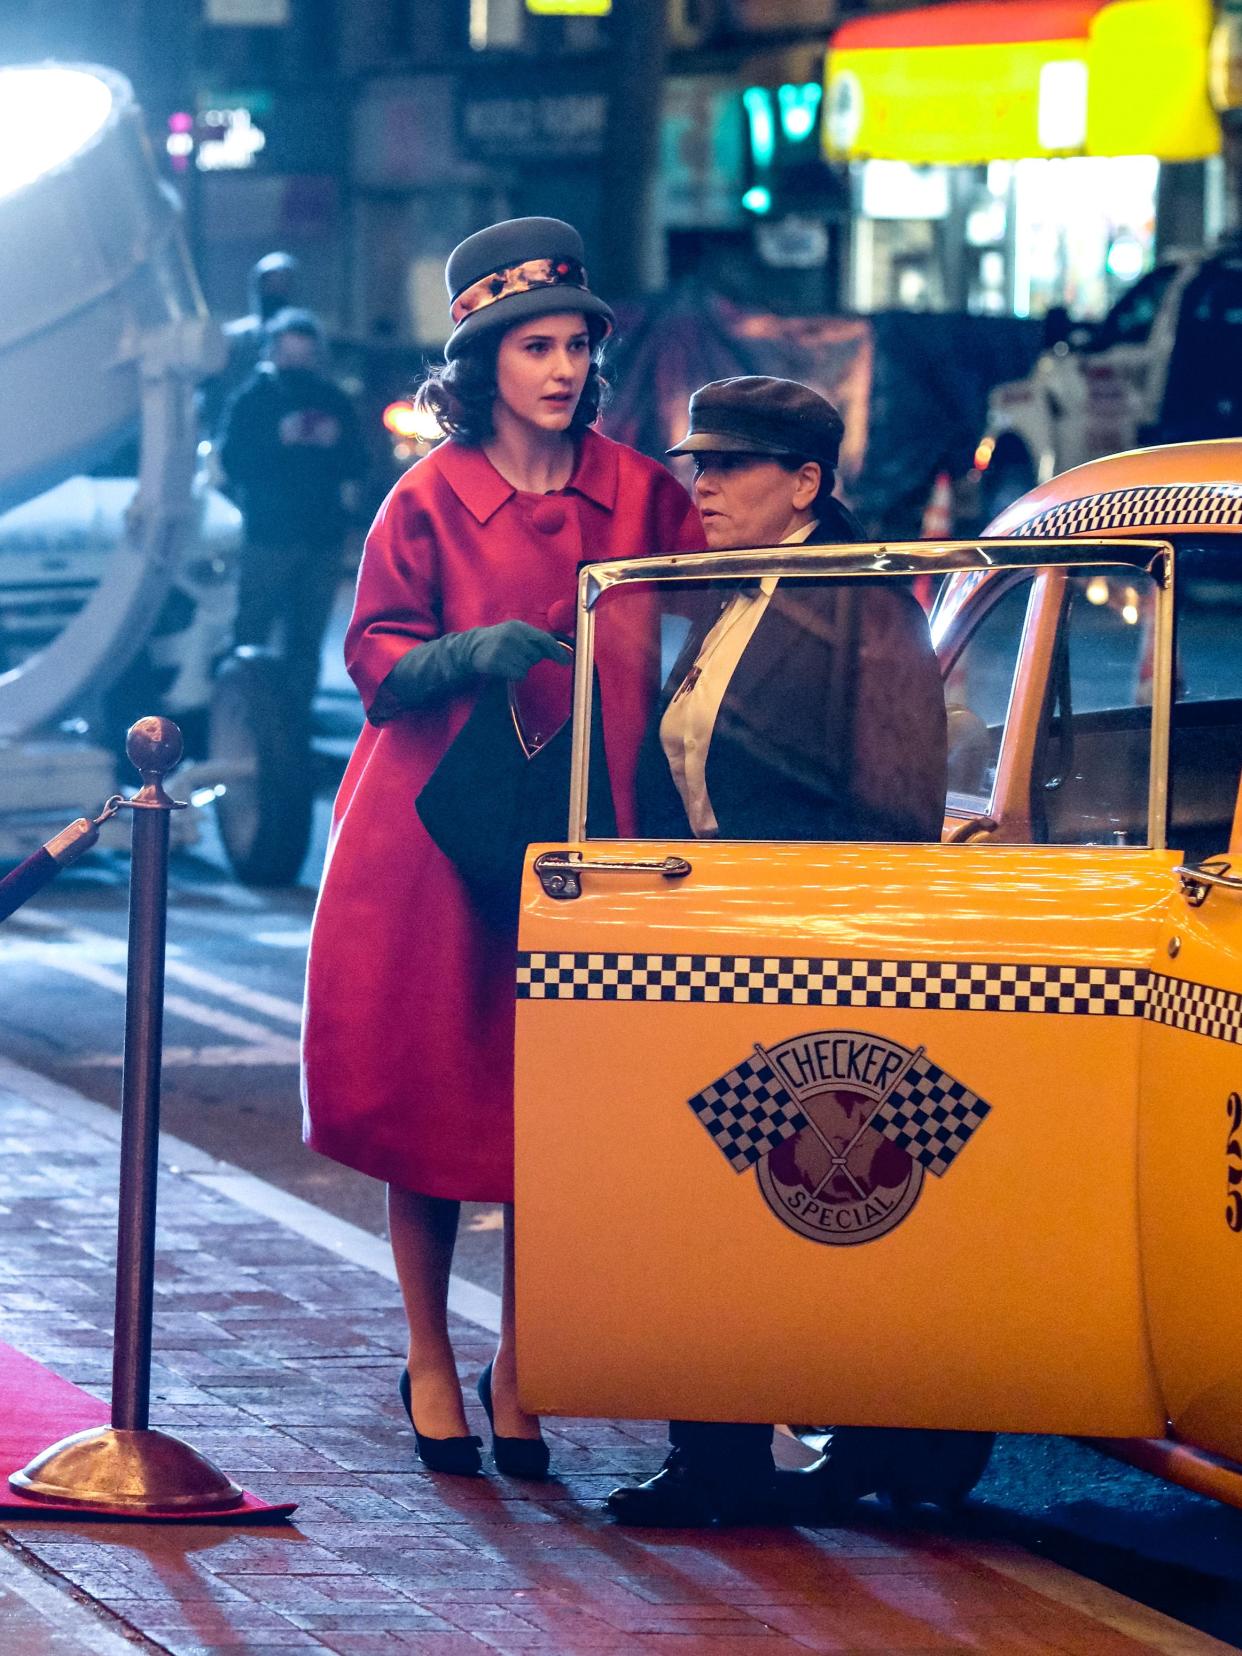 Alex Borstein and Rachel Brosnahan are seen in character filming a scene for "The Marvelous Mrs. Maisel" TV series on April 26, 2021, in New York City.